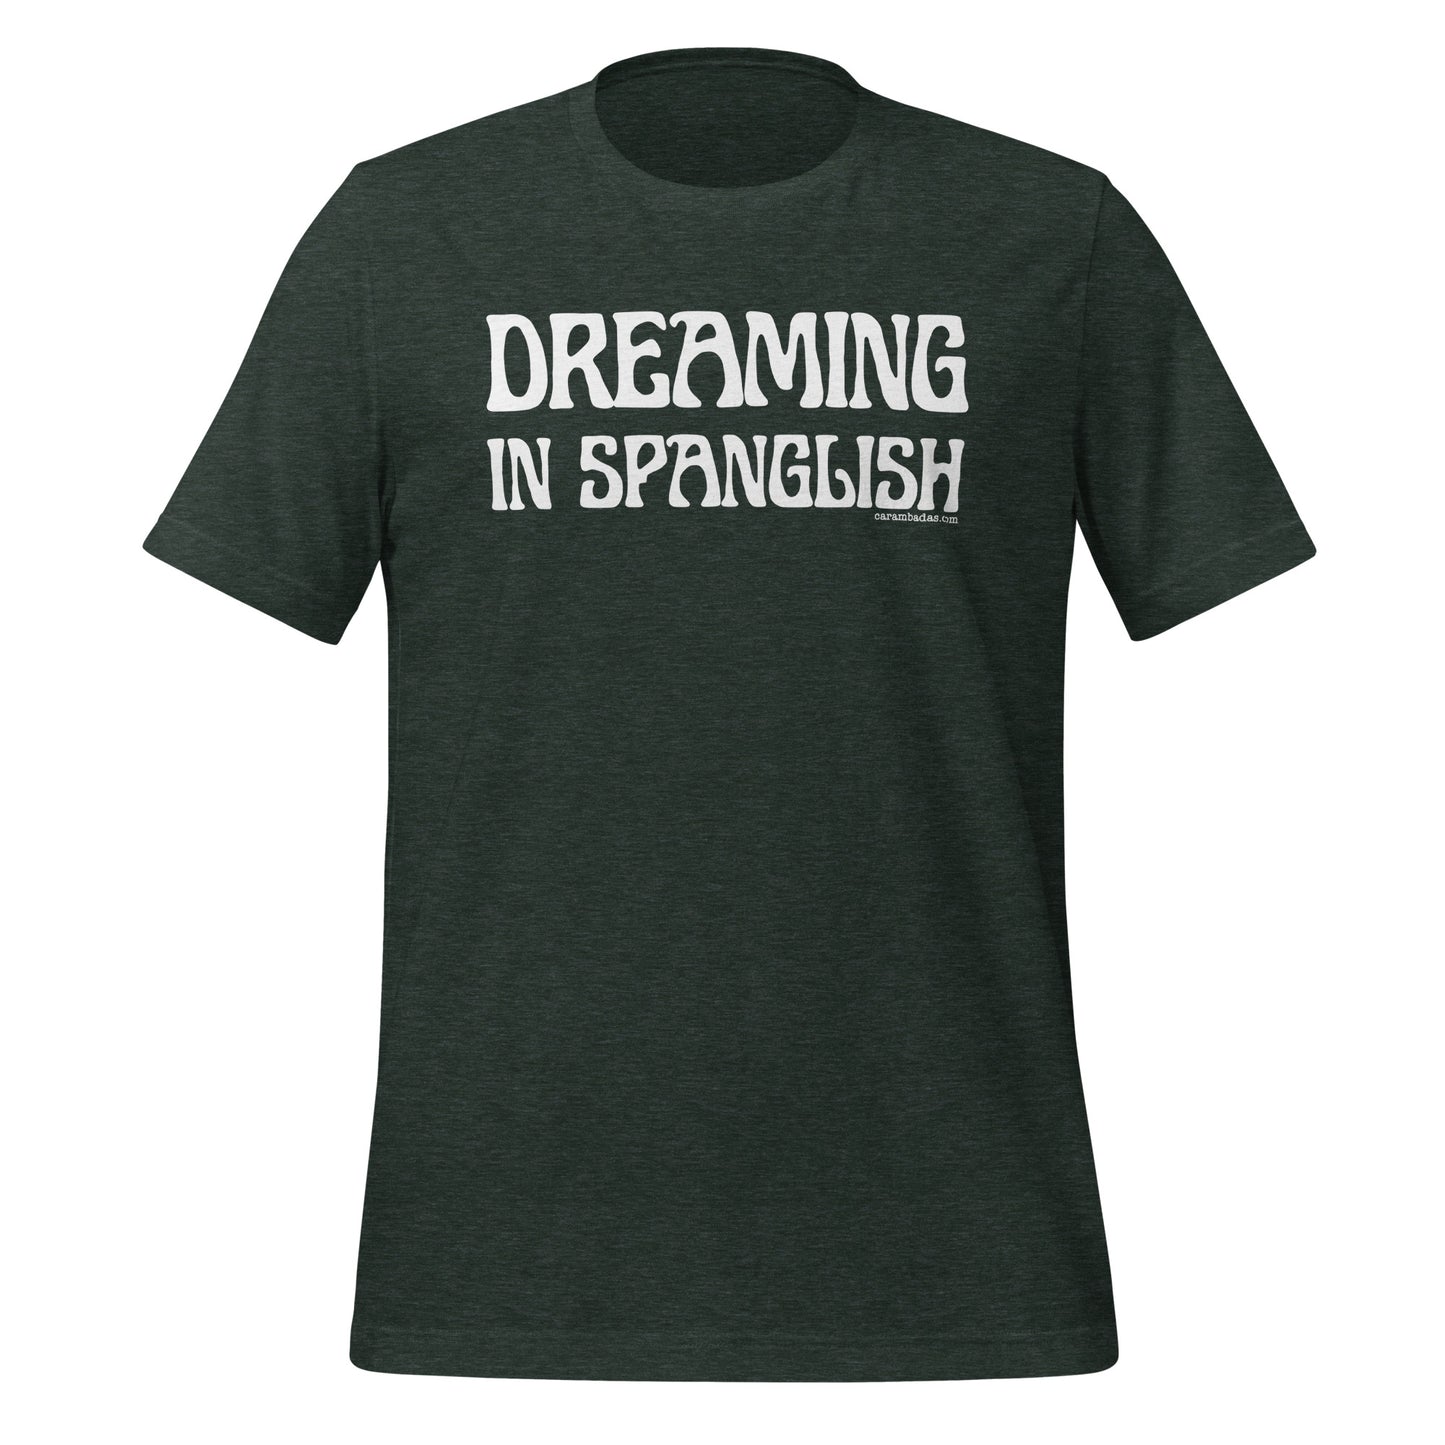 Dreaming in Spanglish Unisex t-shirt